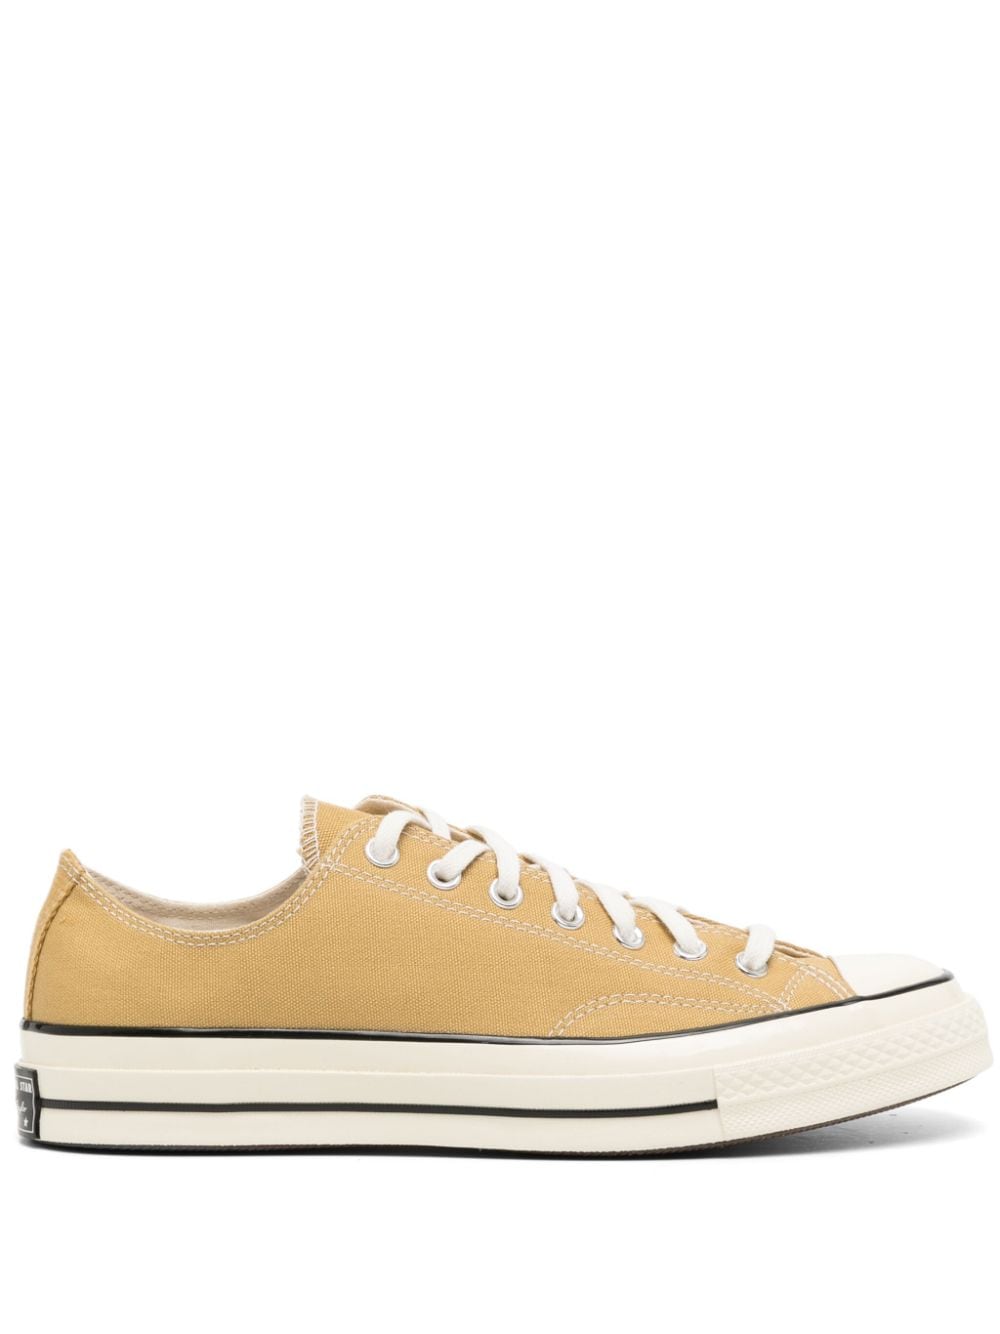 Converse Chuck 70 Low OX Sneakers - Gelb